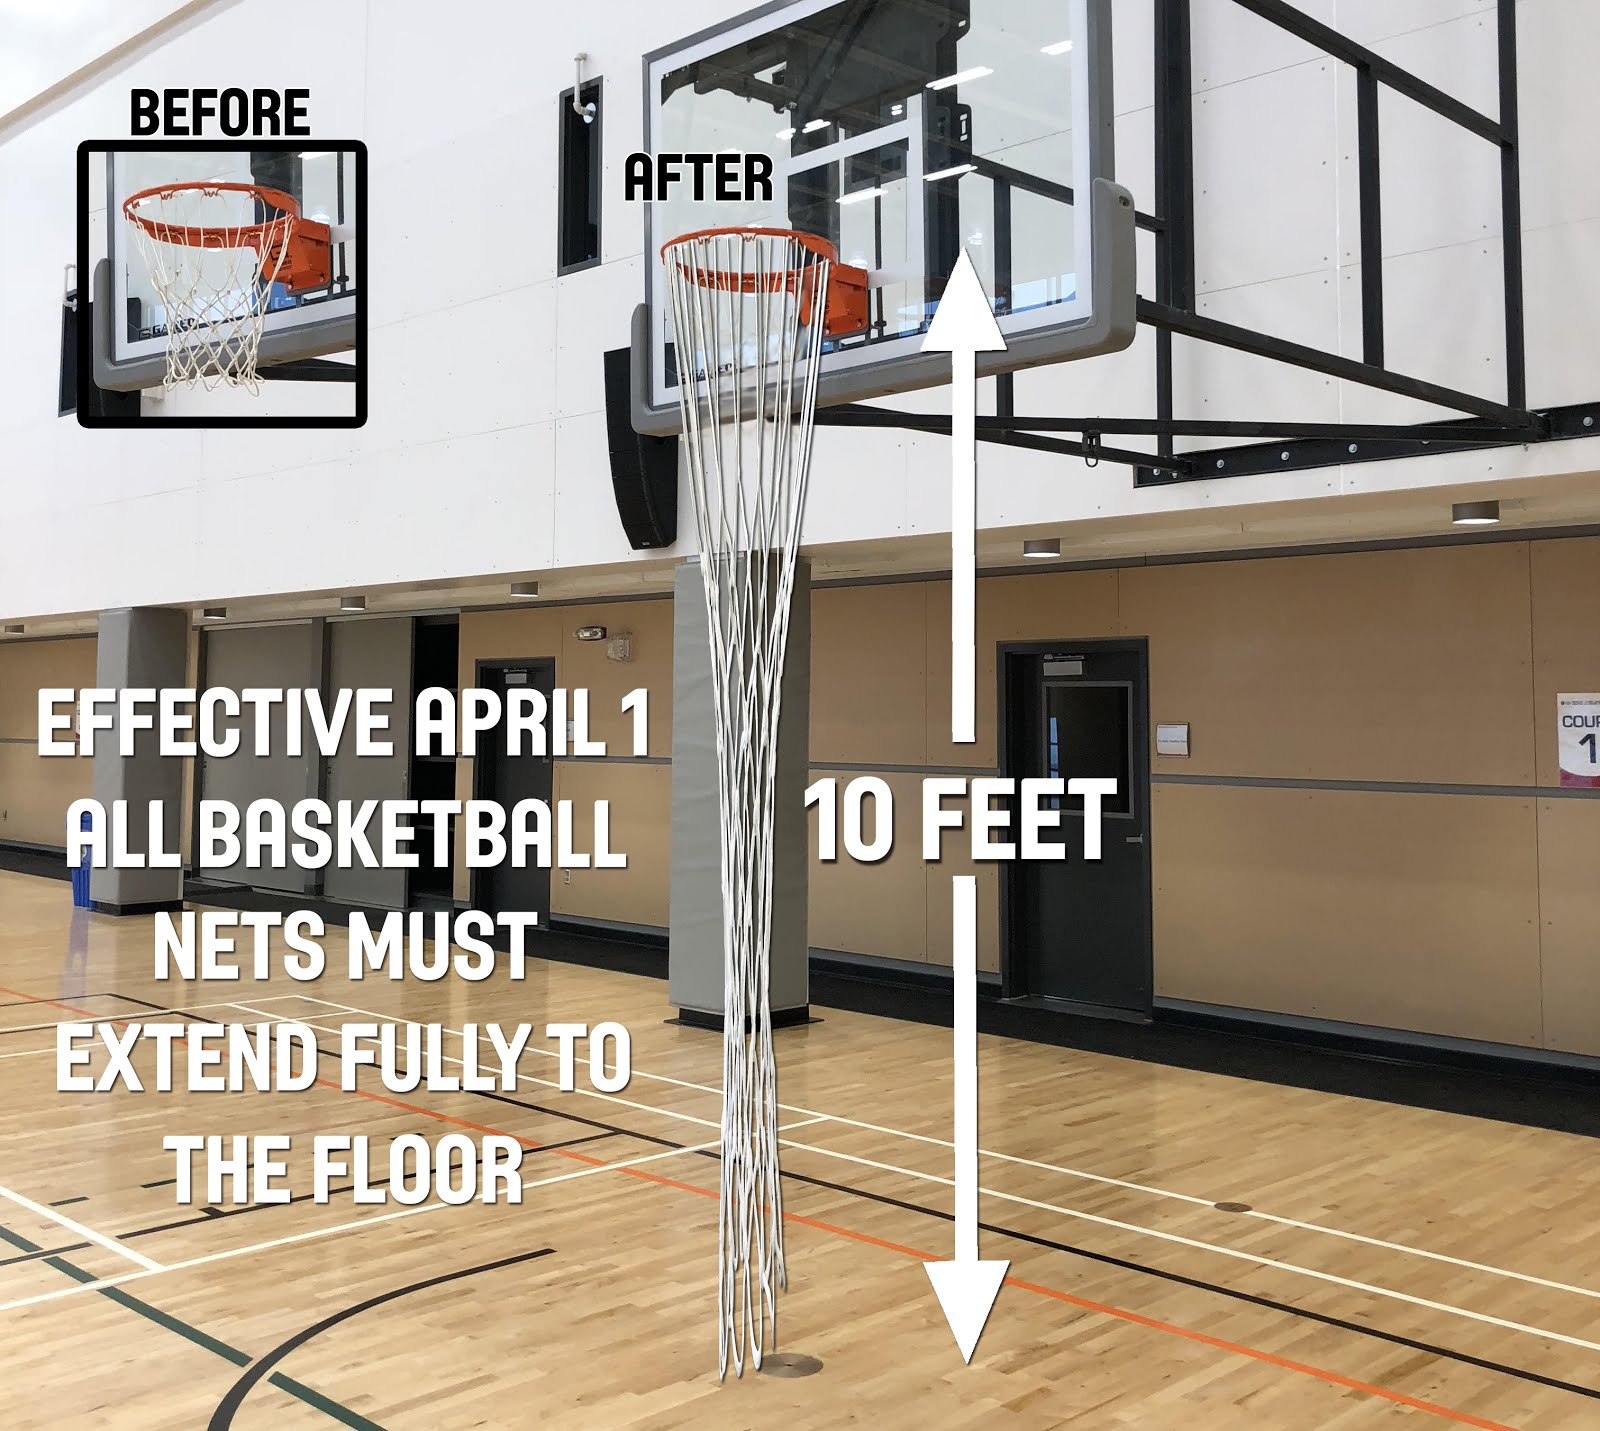 All Basketball Nets Must Extend to the Floor Effective April 1